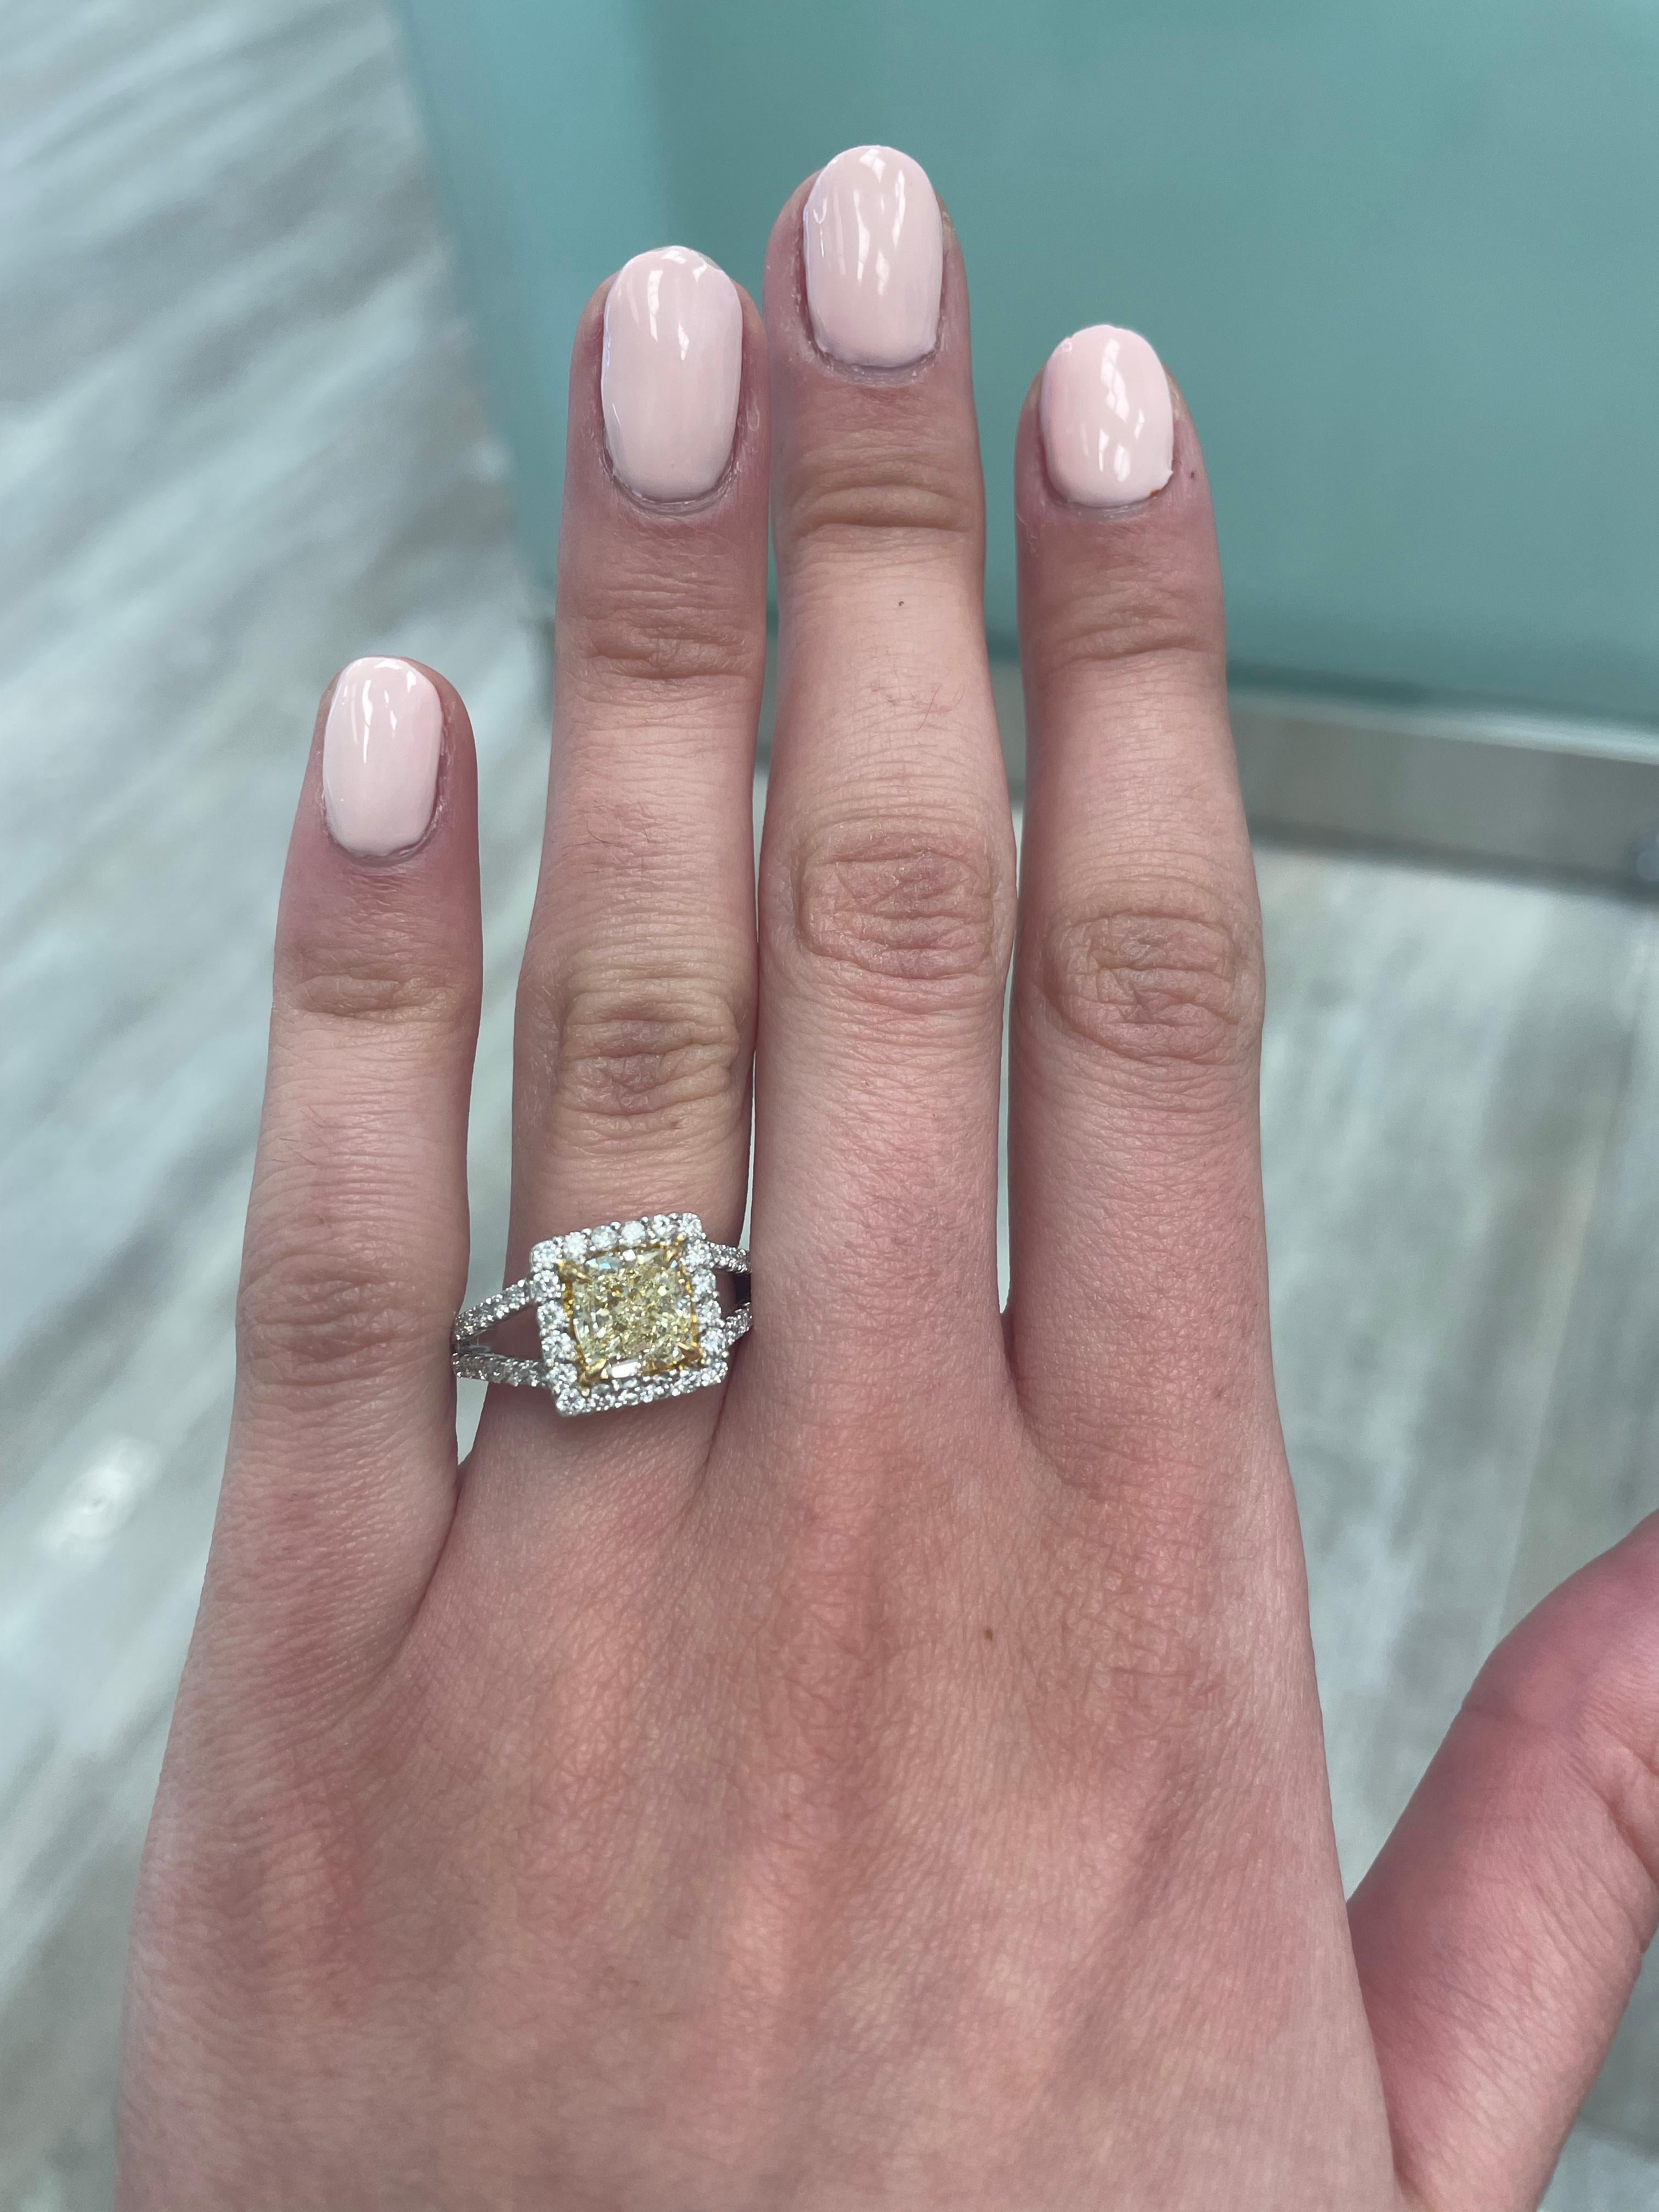 Stunning modern EGL certified yellow diamond with halo ring, two-tone 18k yellow and white gold. By Alexander Beverly Hills
2.72 carats total diamond weight.
2.01 carat cushion cut Fancy Yellow color and SI1 clarity diamond, EGL graded. Complimented